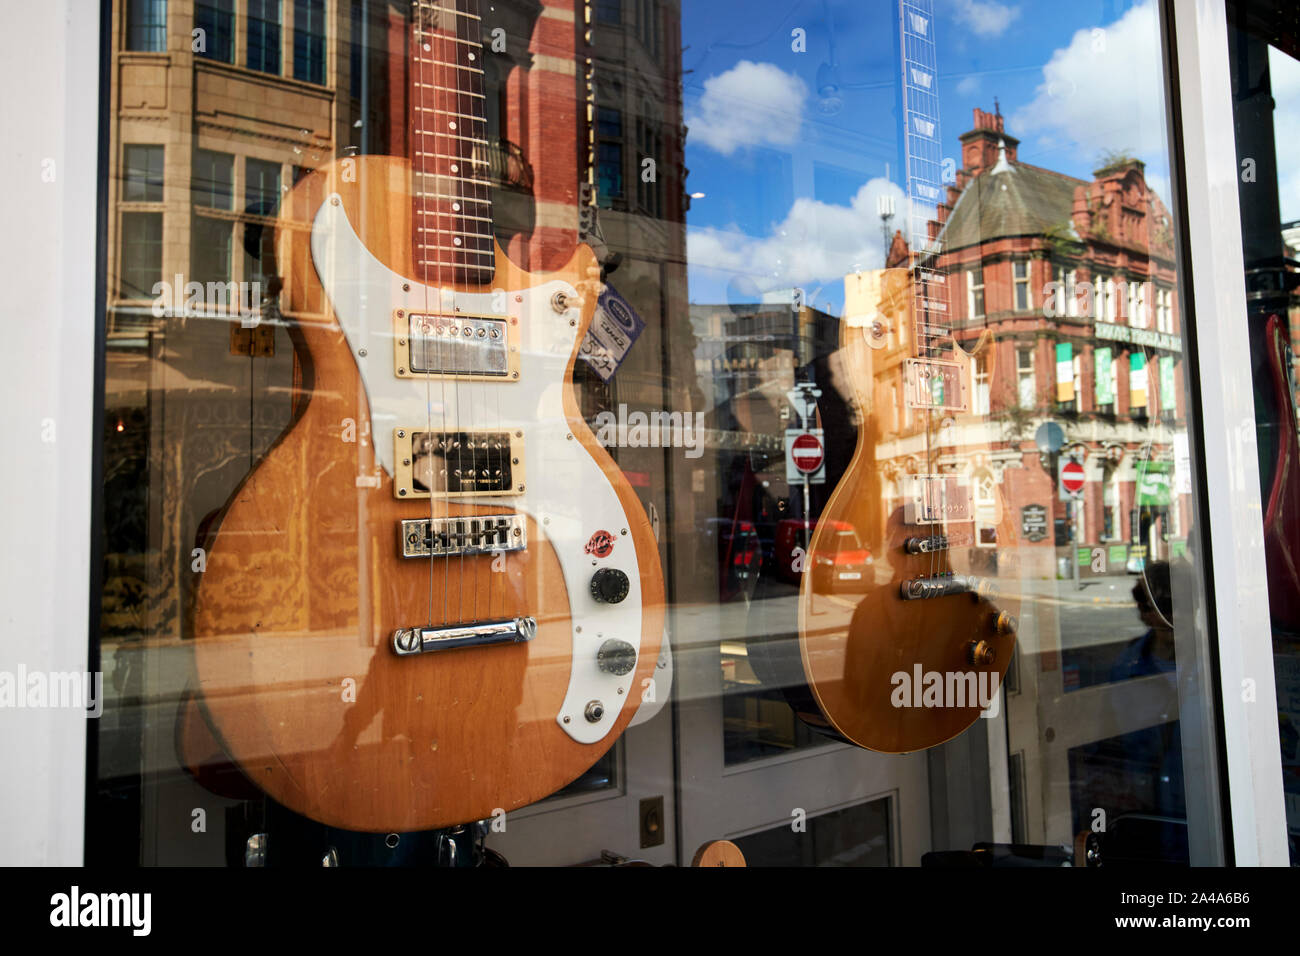 used electric guitars for sale in a music shop window display Liverpool England UK Stock Photo